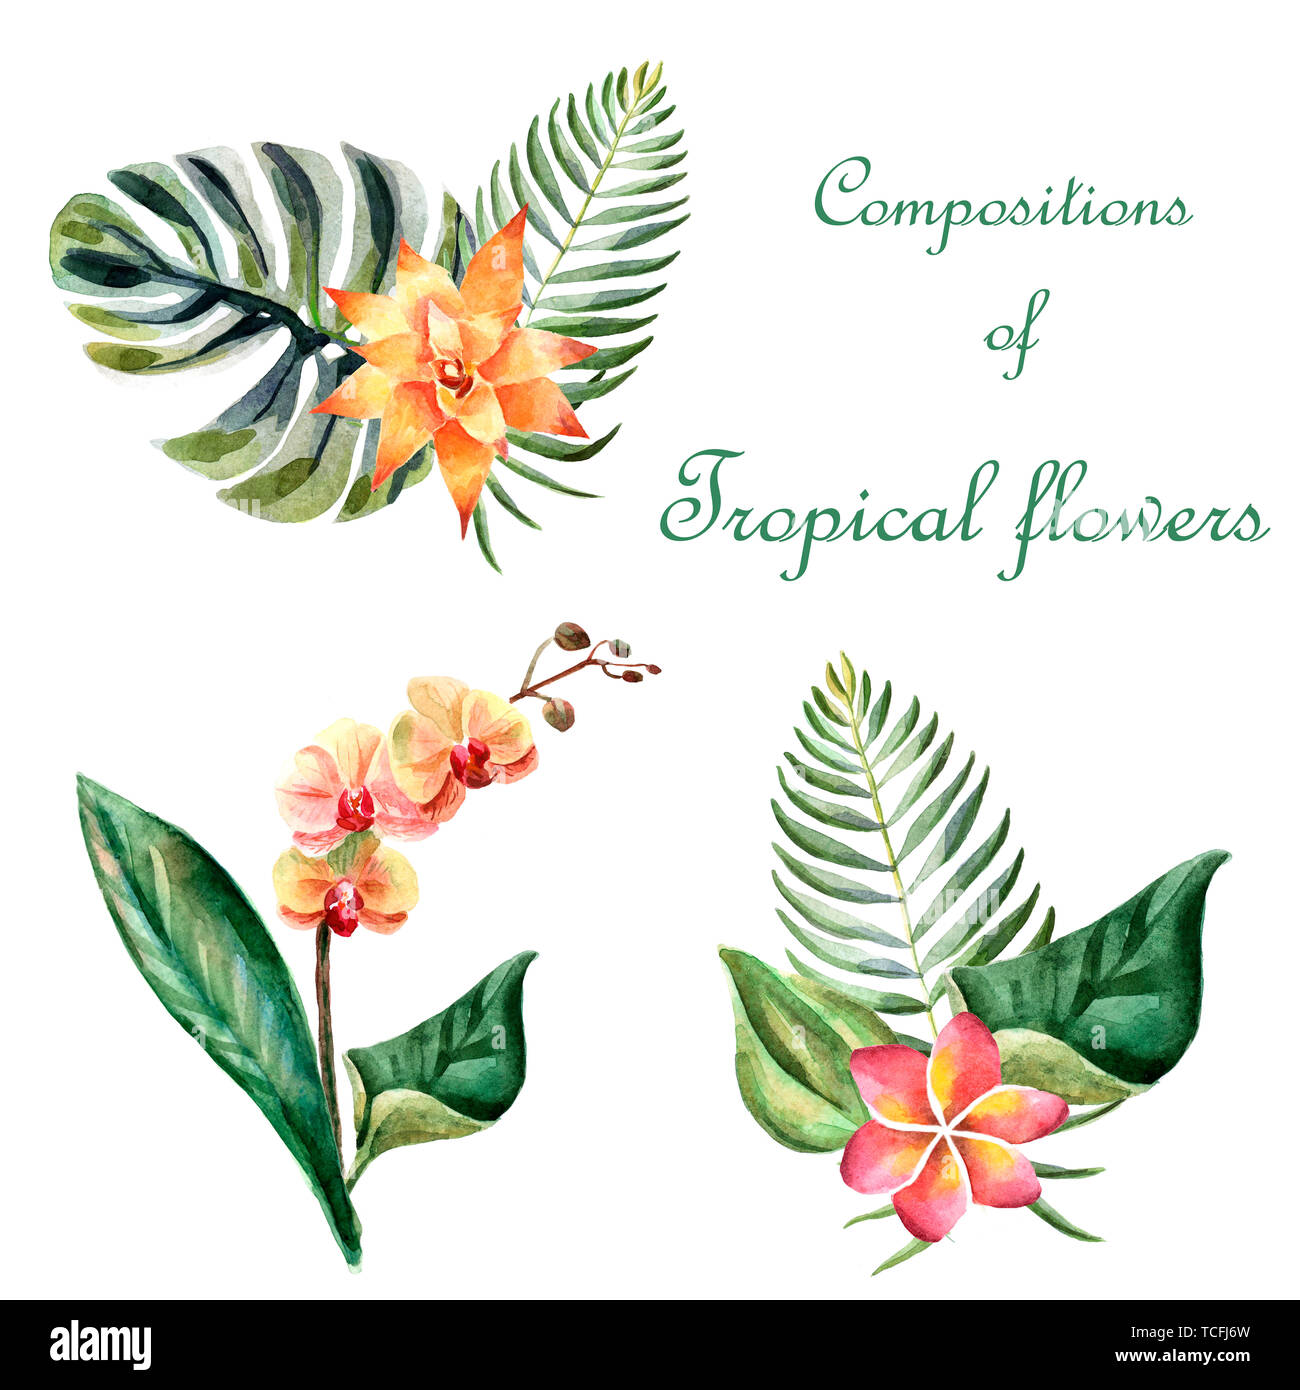 Watercolor tropical floral compositions isolated on a white background Stock Photo